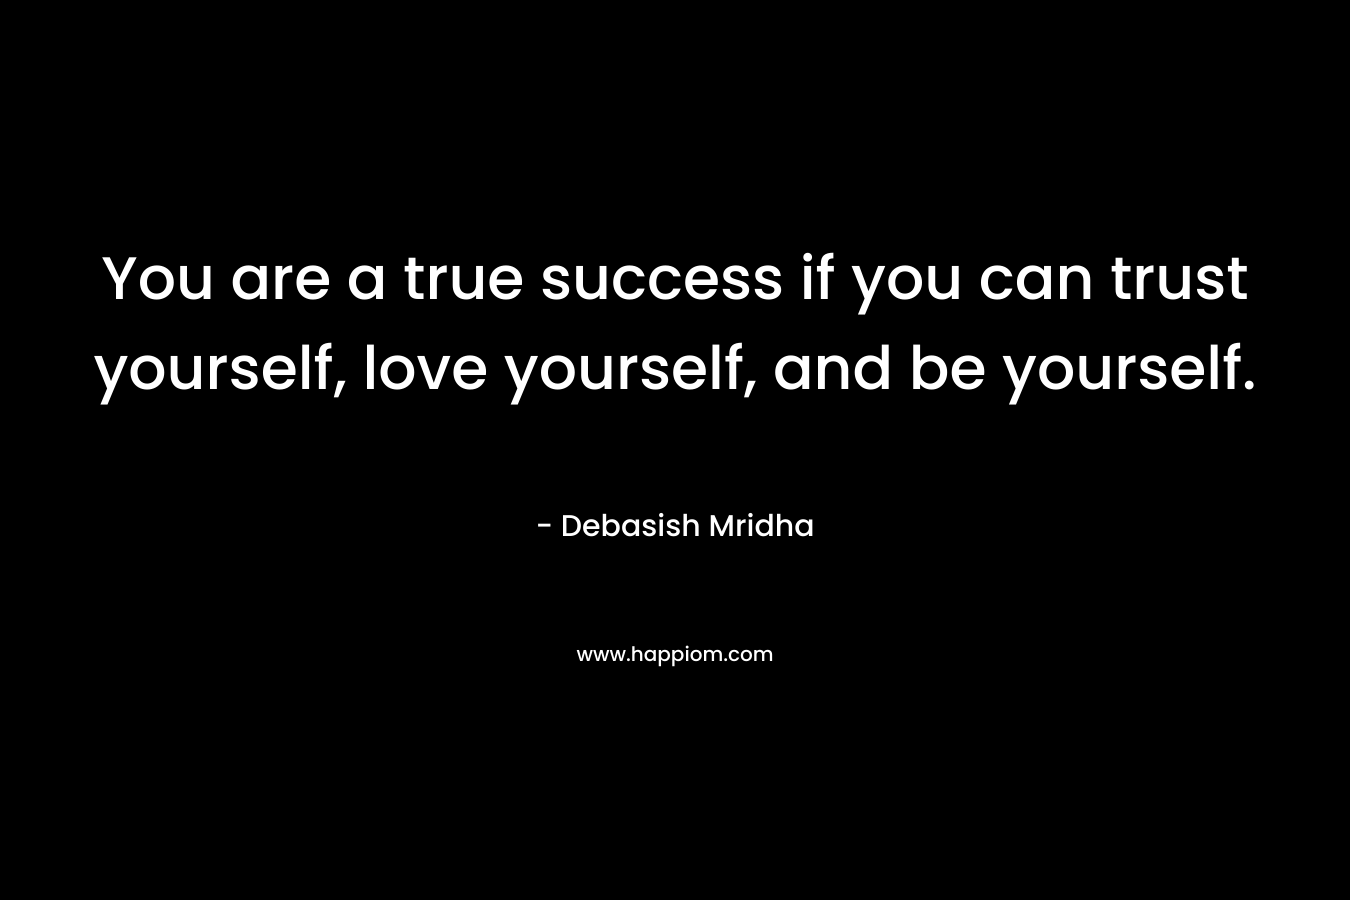 You are a true success if you can trust yourself, love yourself, and be yourself.